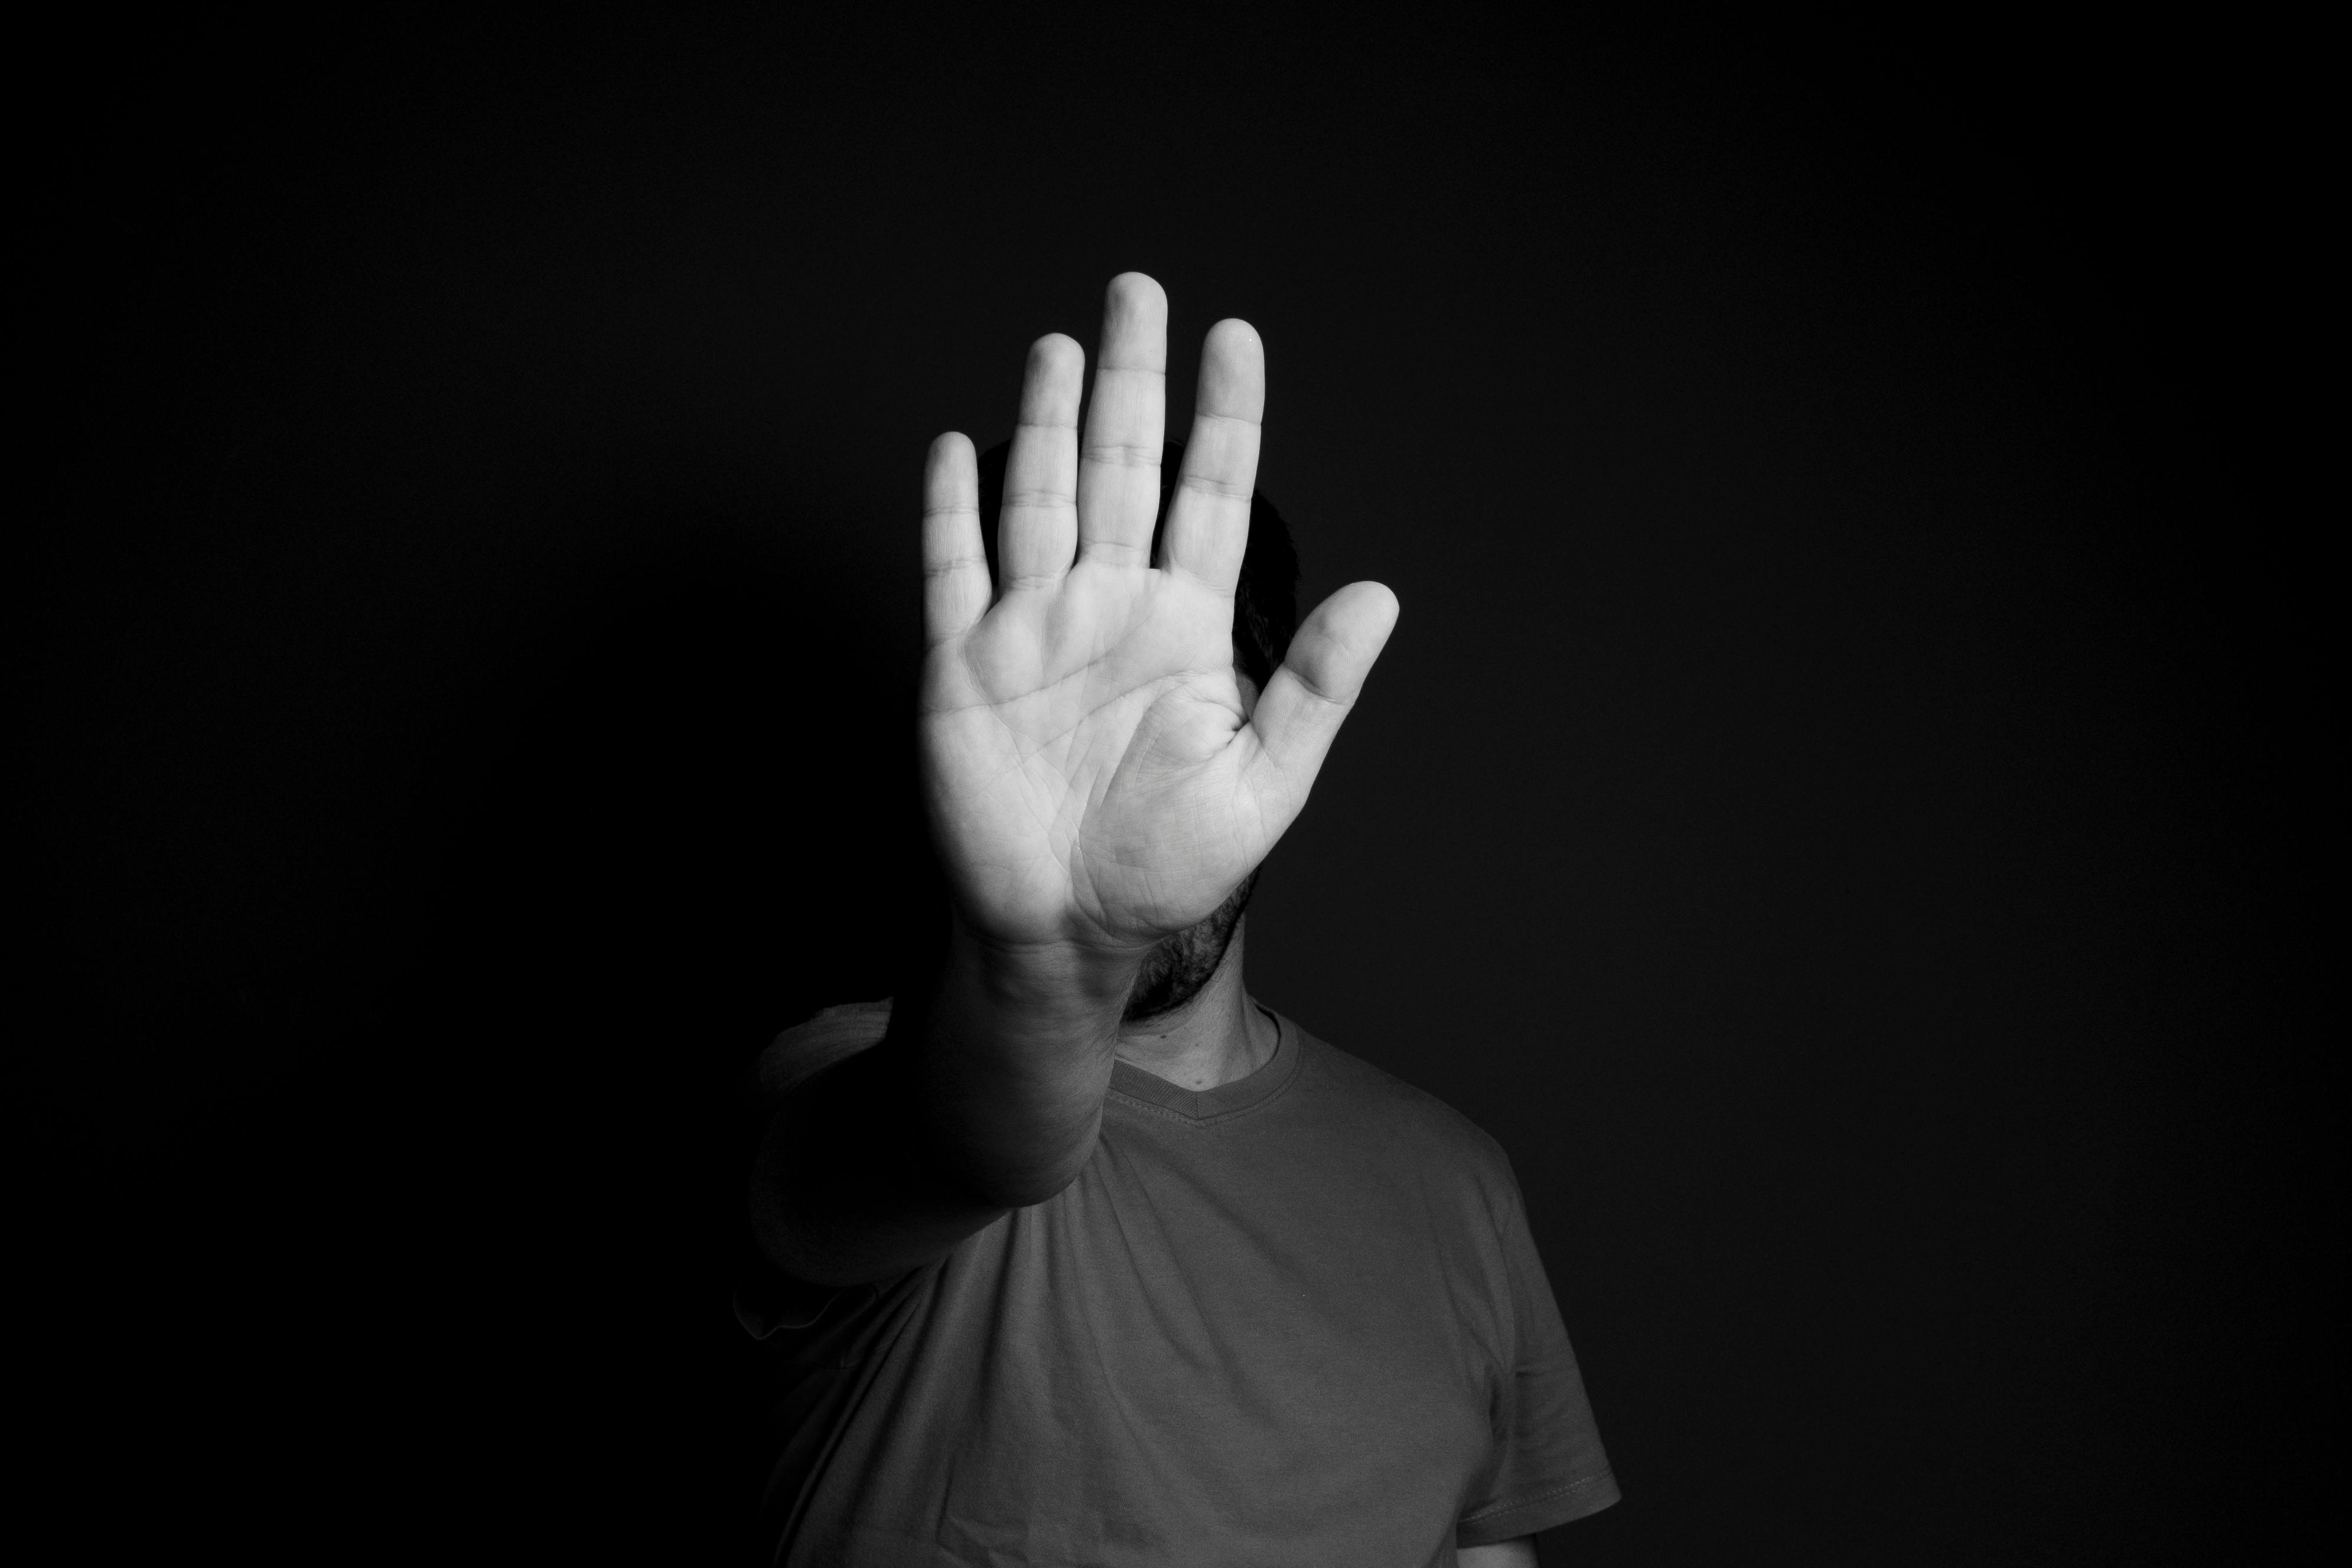 A hand showing the palm | Source: Pexels